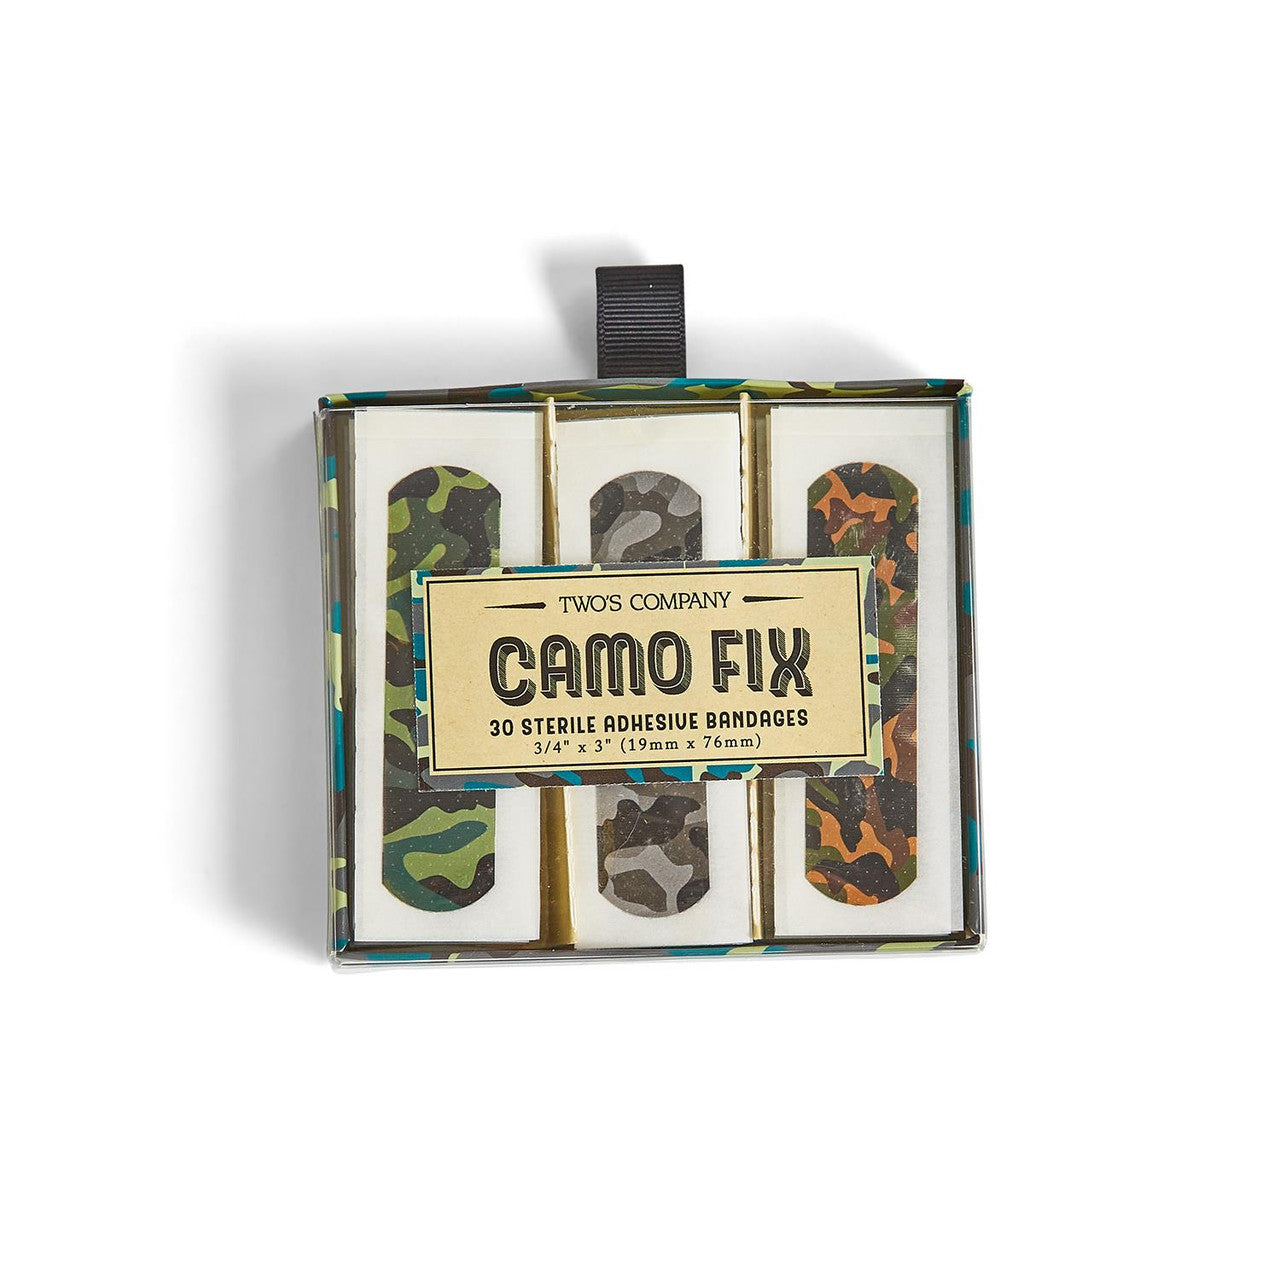 Two's Company Camo Fix Sterile Adhesive Bandages